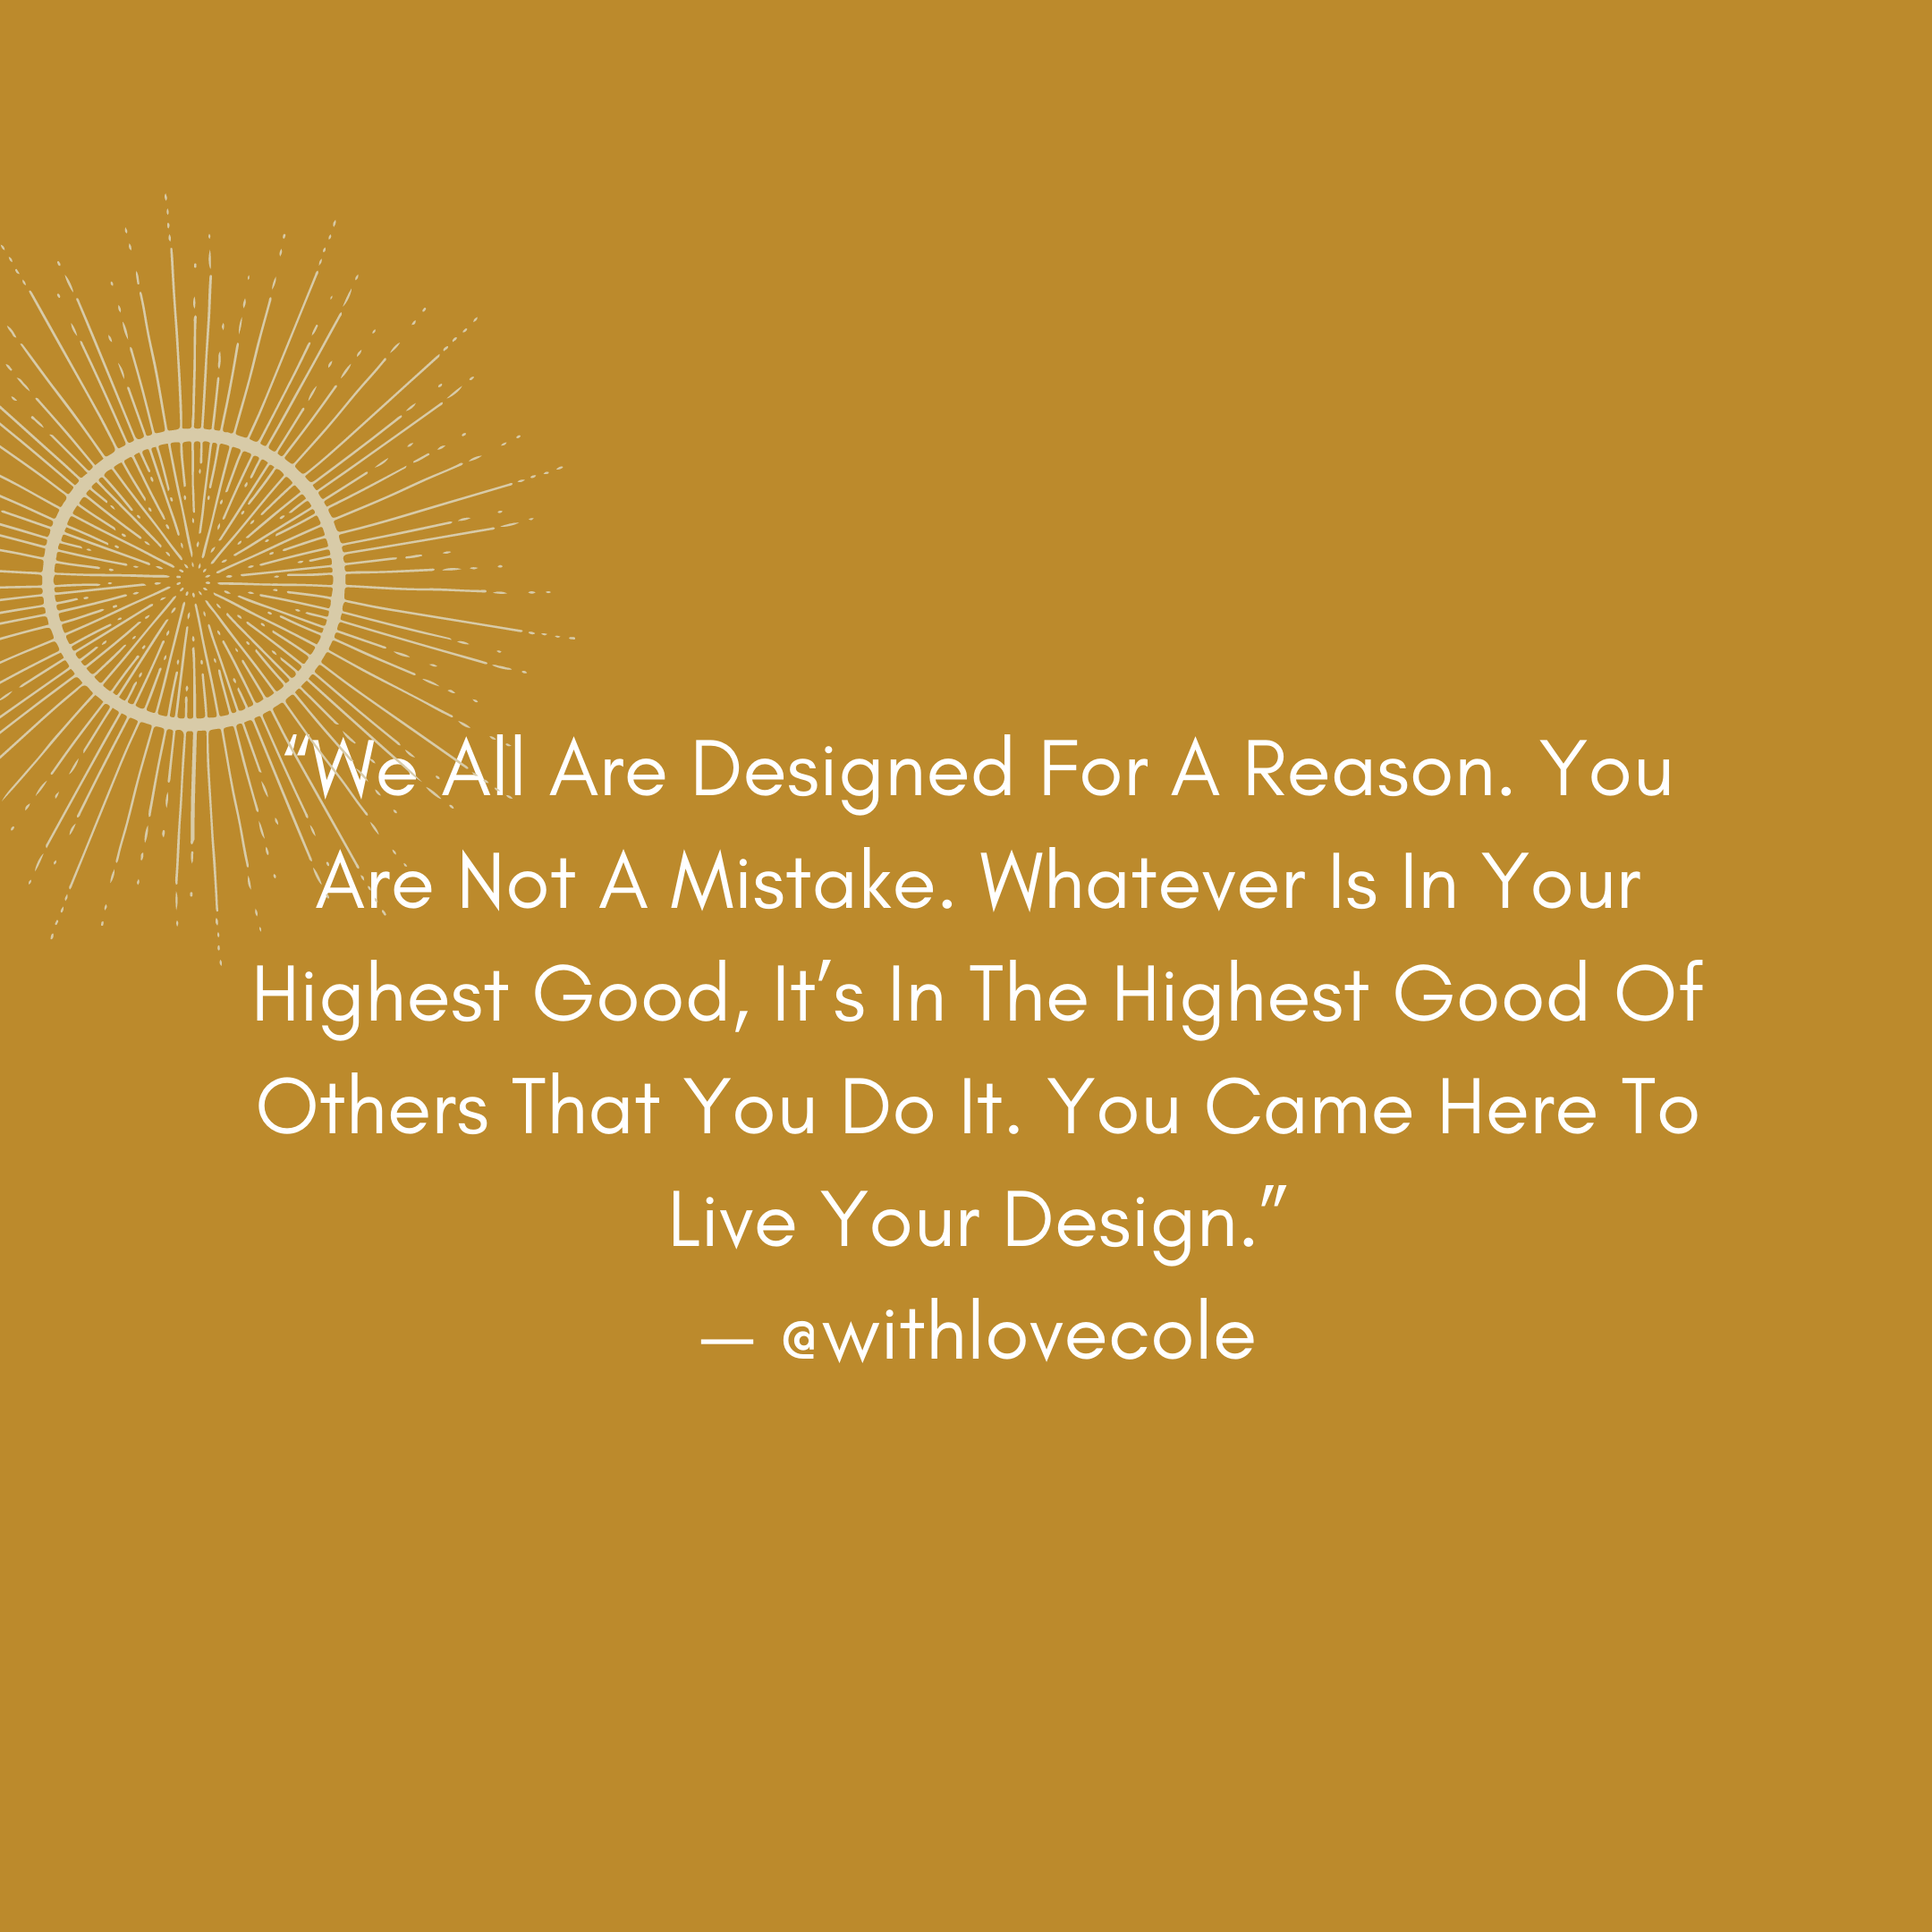 “we all are designed for a reason. you are not a mistake. whatever is in your highest good, it’s in the highest good of others that you do it. you came here to live your design.” — @withlovecole.png